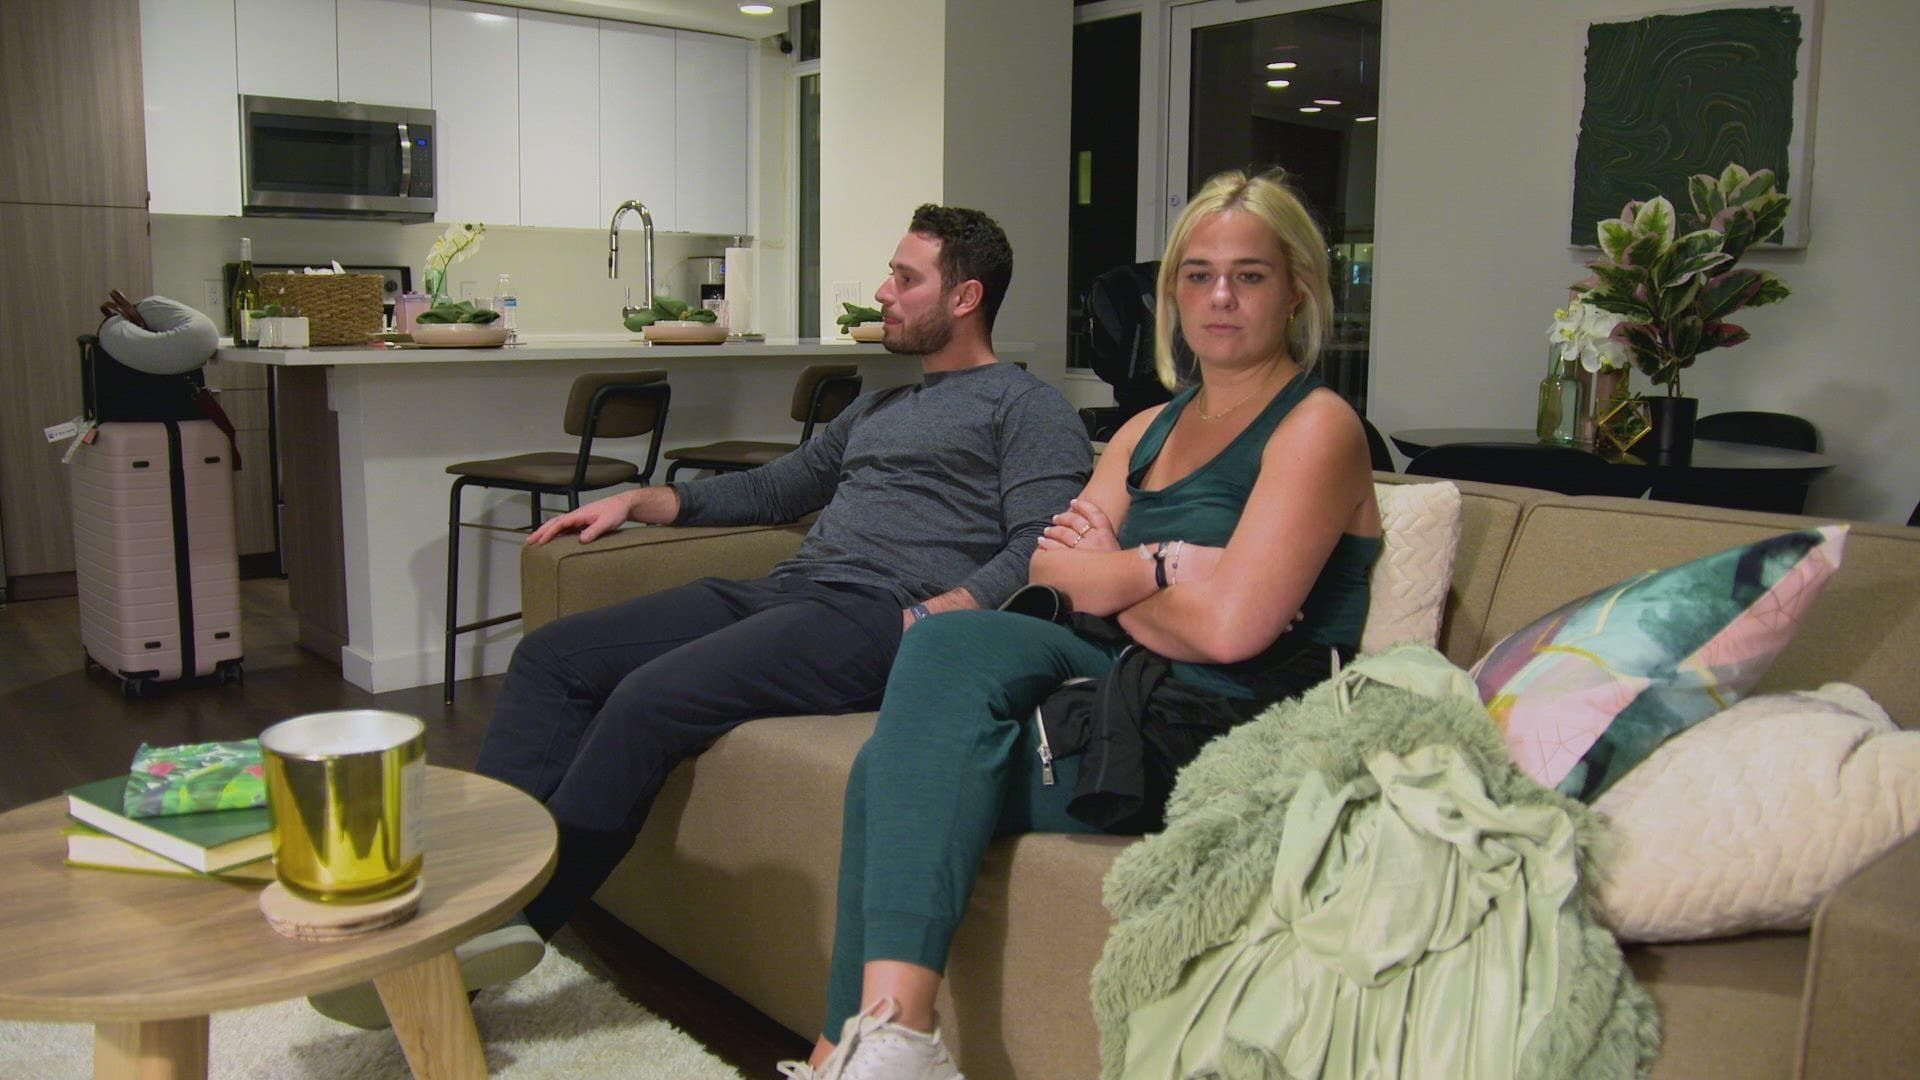 Married at First Sight background